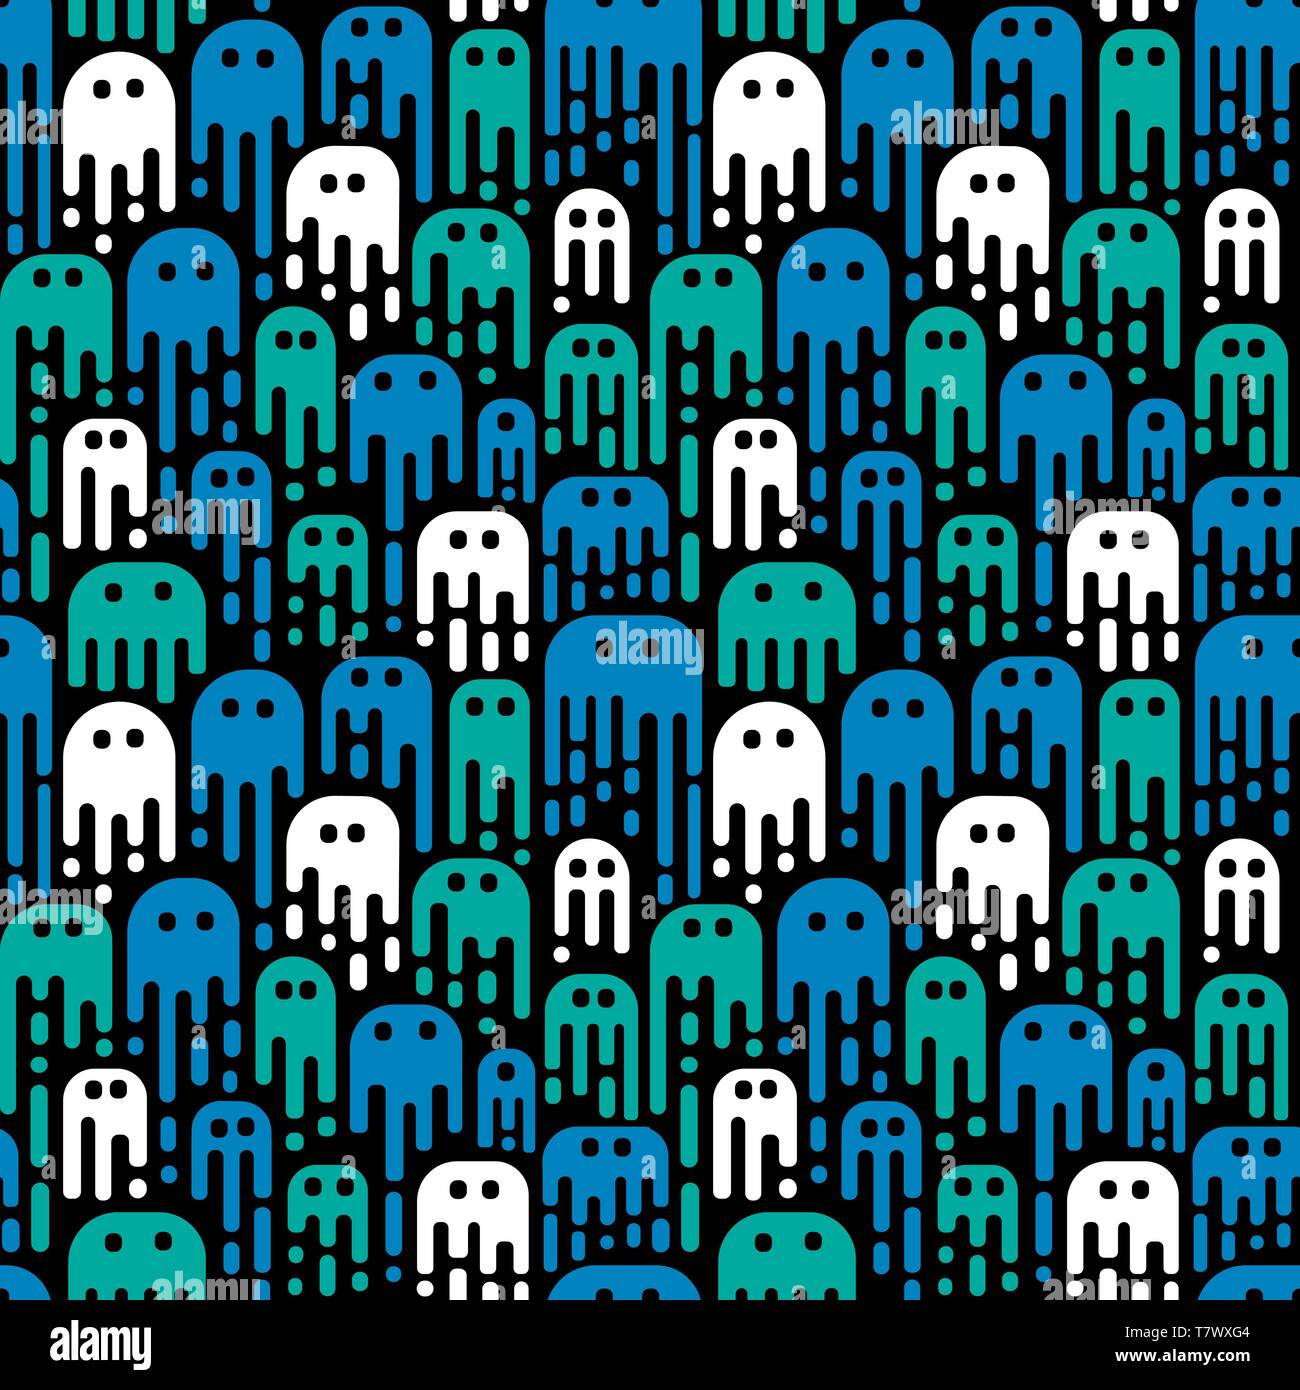 Cute cartoon ghosts on a black background Vector seamless pattern